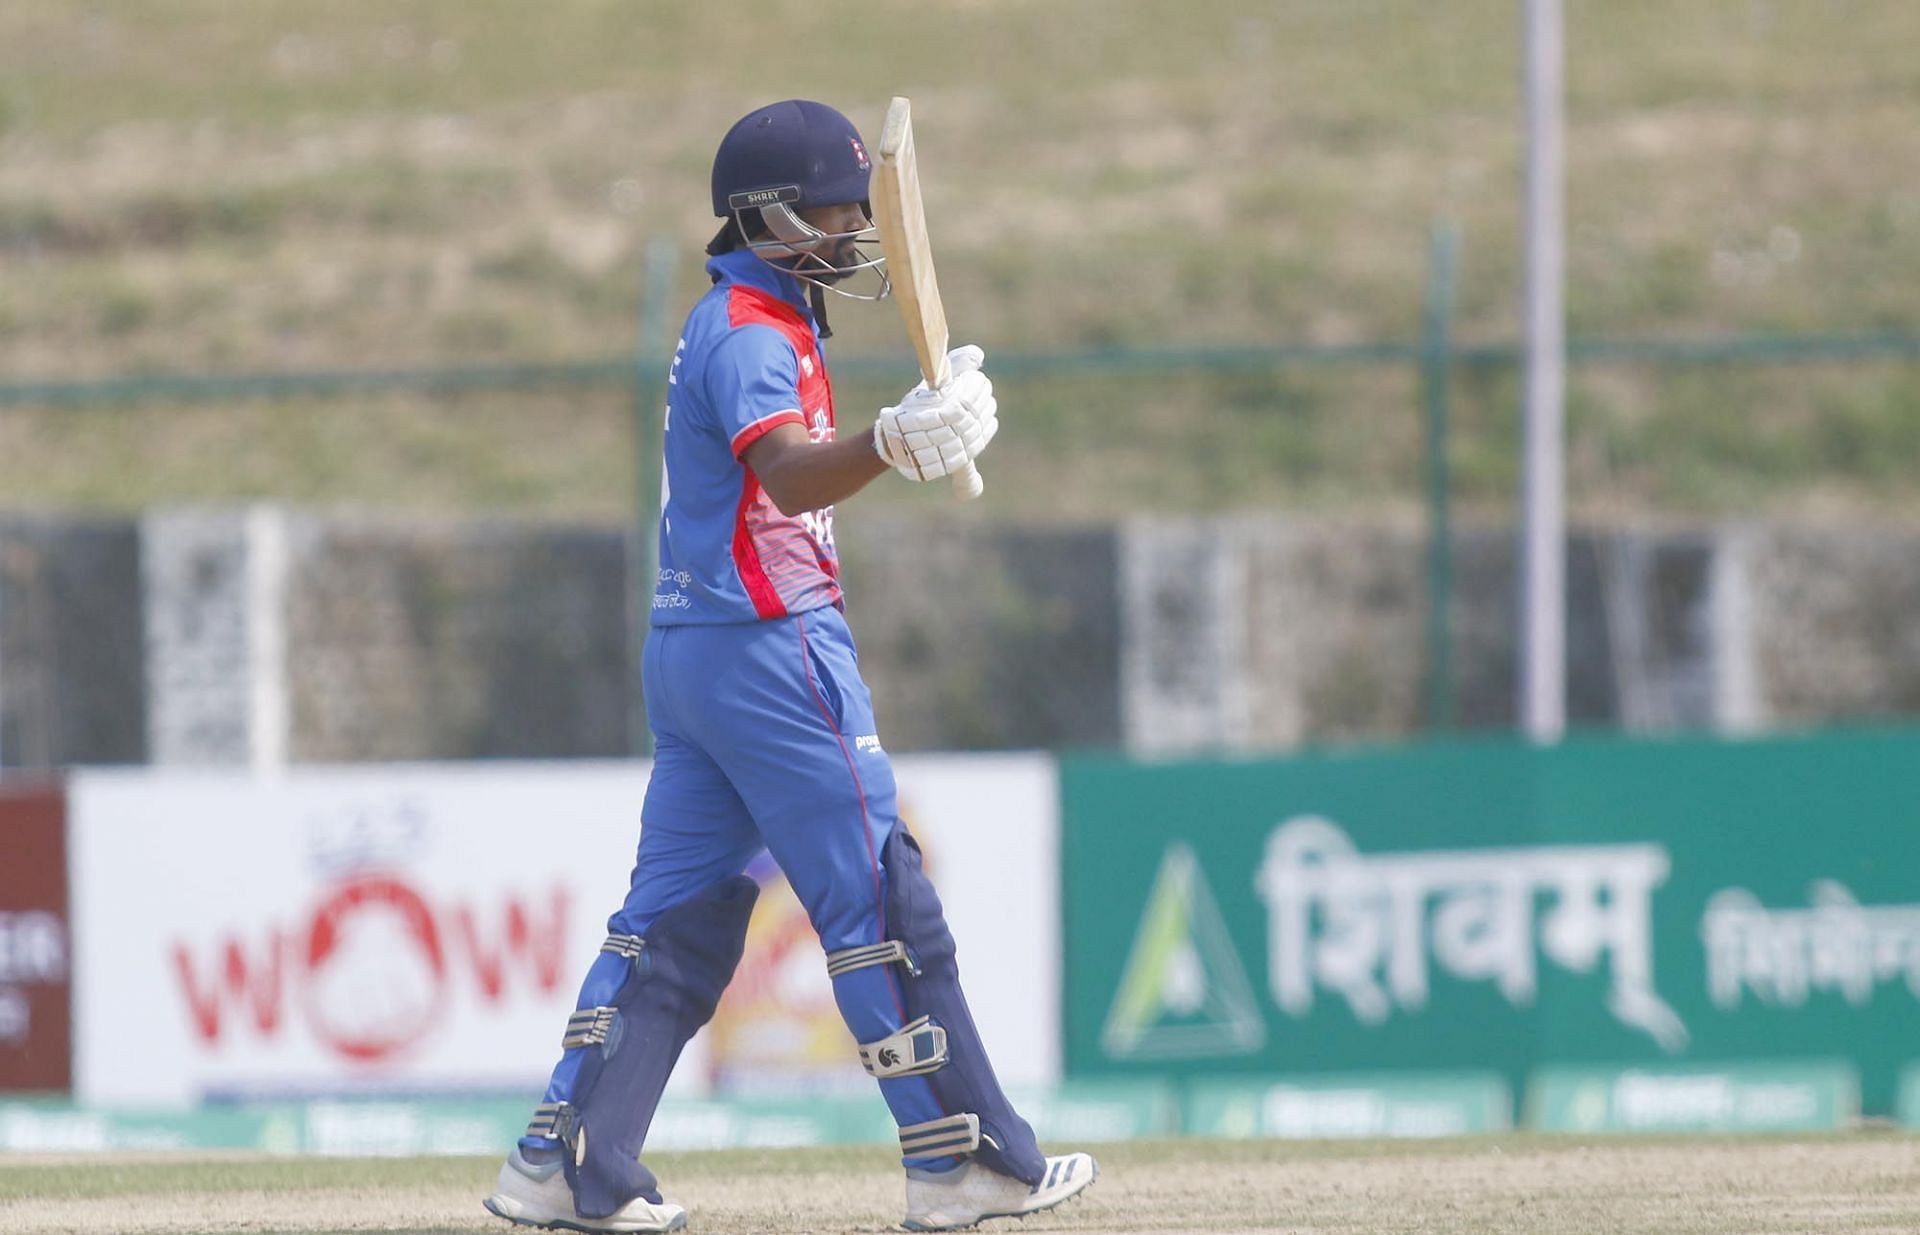 Dipendra Singh-Airee in action for Nepal (PC: Cricket Association of Nepal)